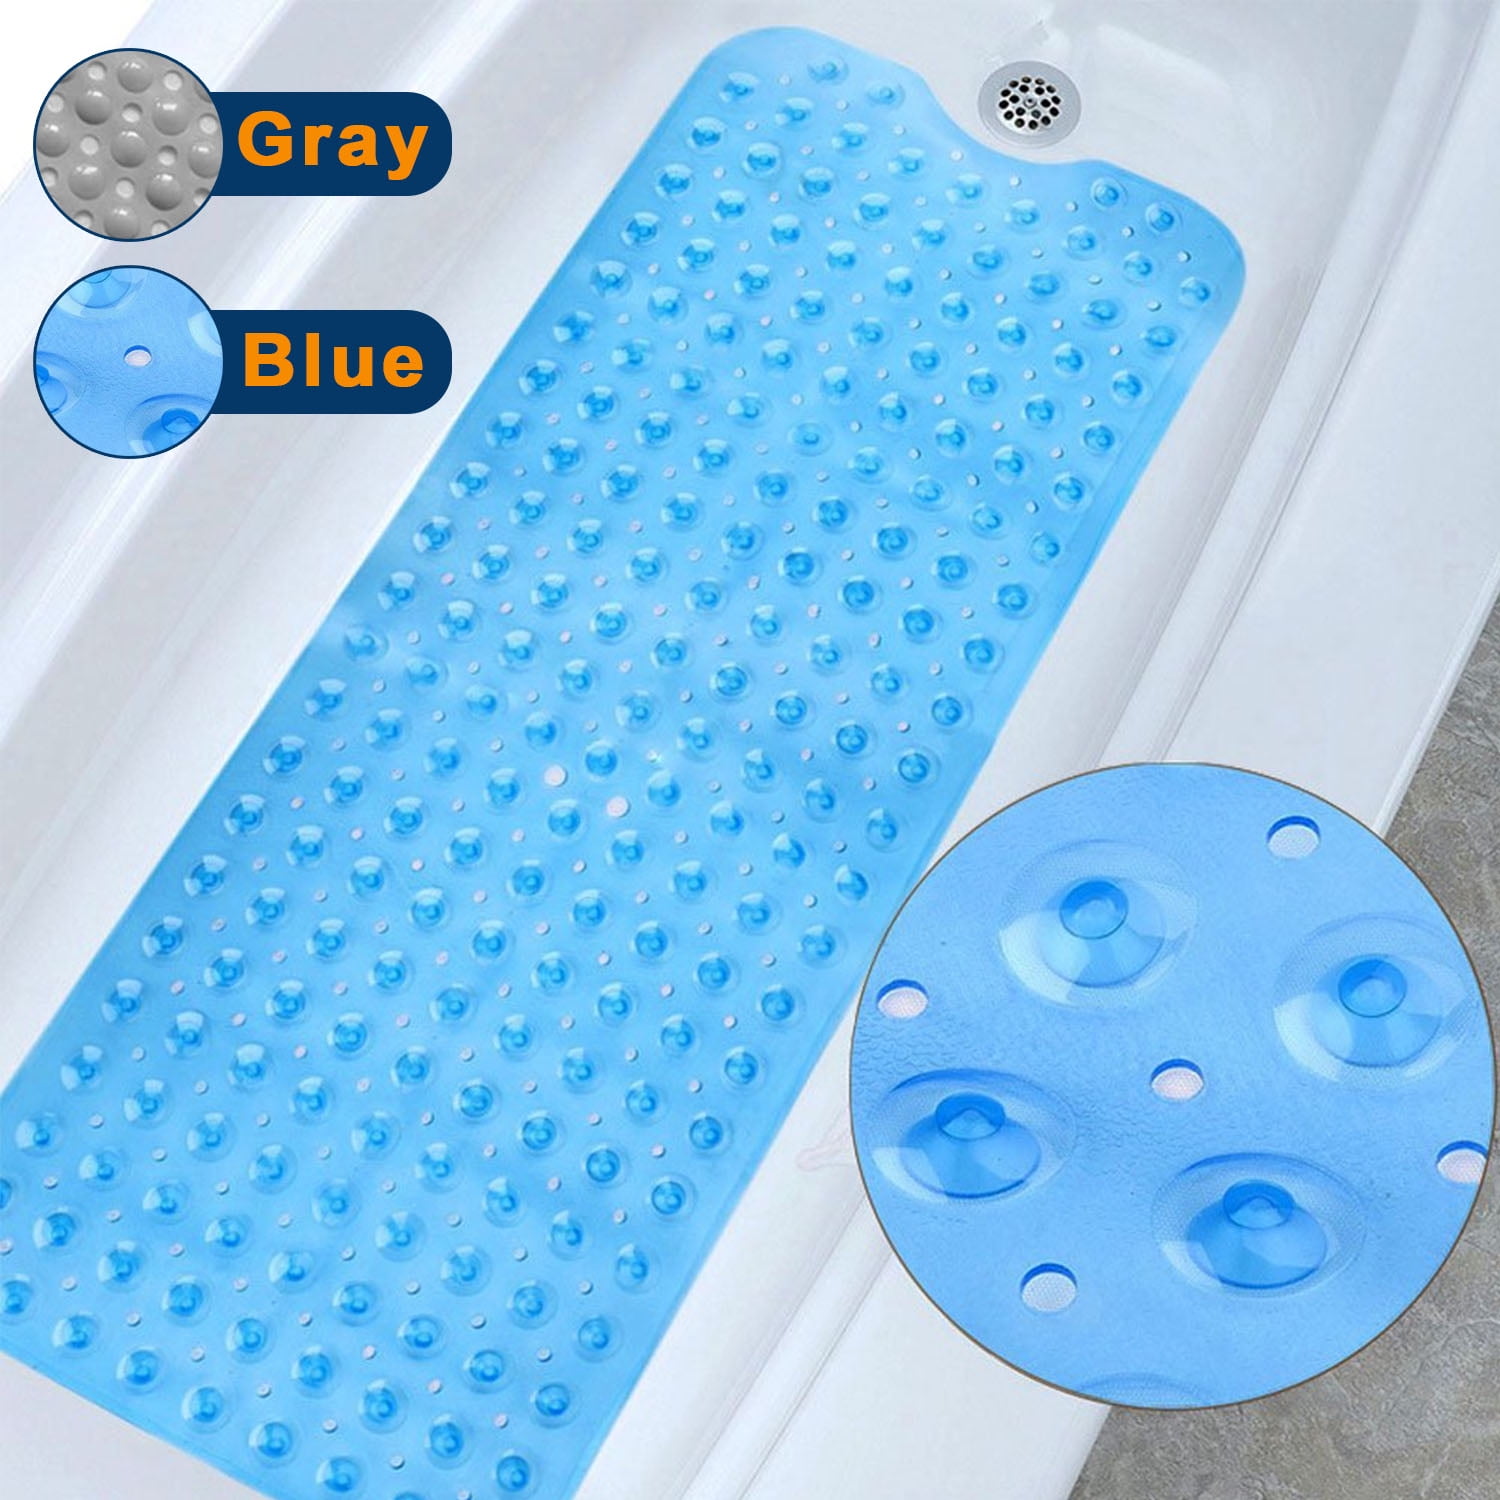 Semfri Bath Tub Shower Mat Non Slip Shower Floor Mats for Bathroom Bath Tub Washable with Drain Holes and Suction Cups 16 X35 inch Clear Gray, Size